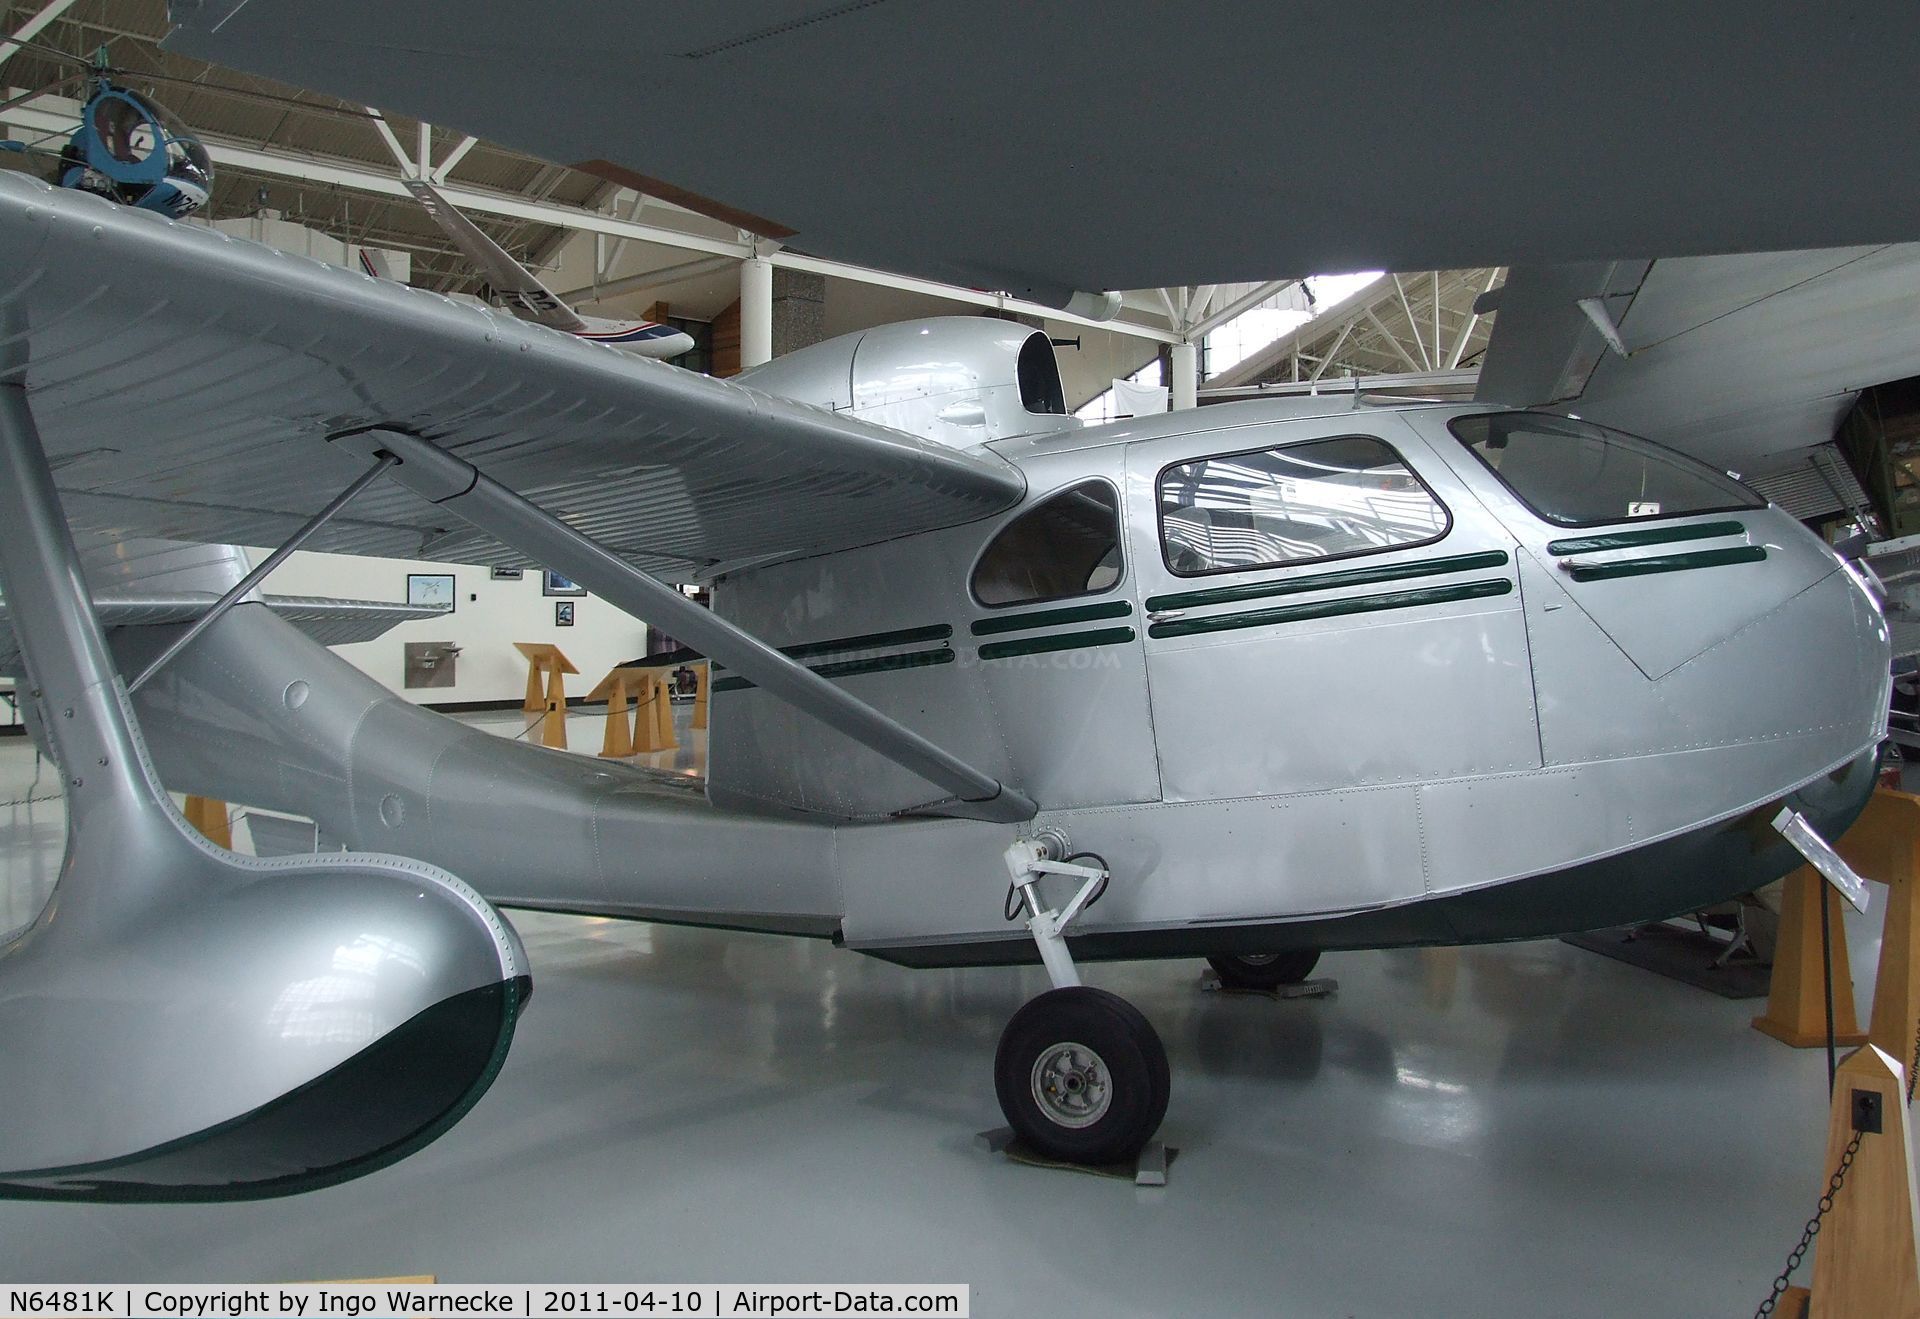 N6481K, 1947 Republic RC-3 Seabee C/N 736, Republic RC-3 Seabee at the Evergreen Aviation & Space Museum, McMinnville OR